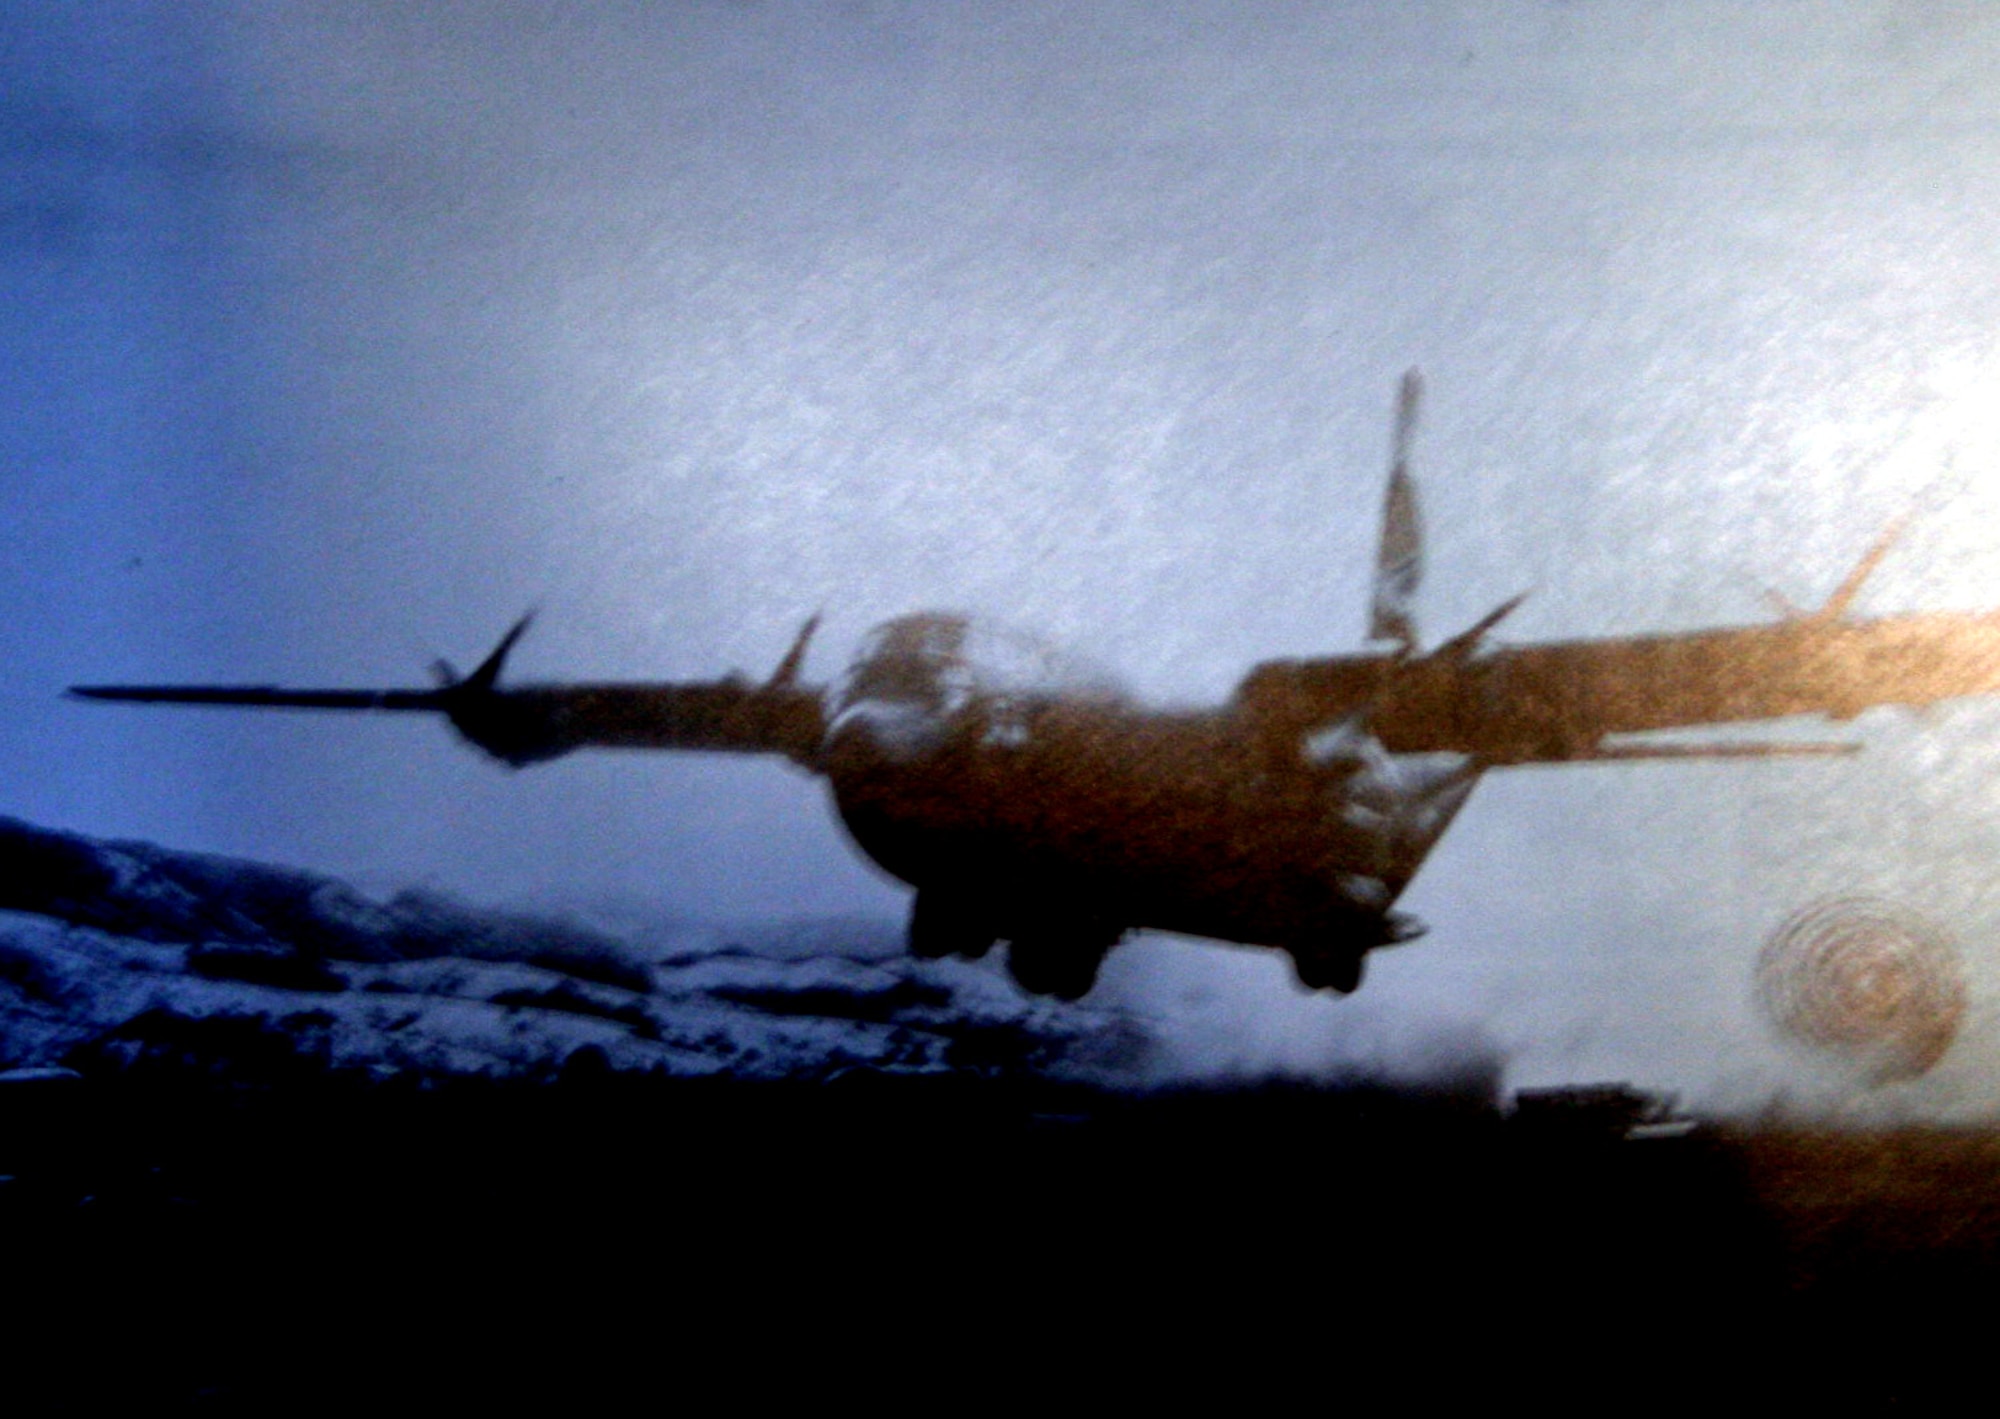 A C-130 Hercules uses the low altitude parachute extraction system to deliver supplies to a forward operating base in Khe Sanh, Vietnam, in 1968. C-130s were extensively used in the Vietnam War for tactical airlift of troops and supplies. (U.S. Air Force History Photo)